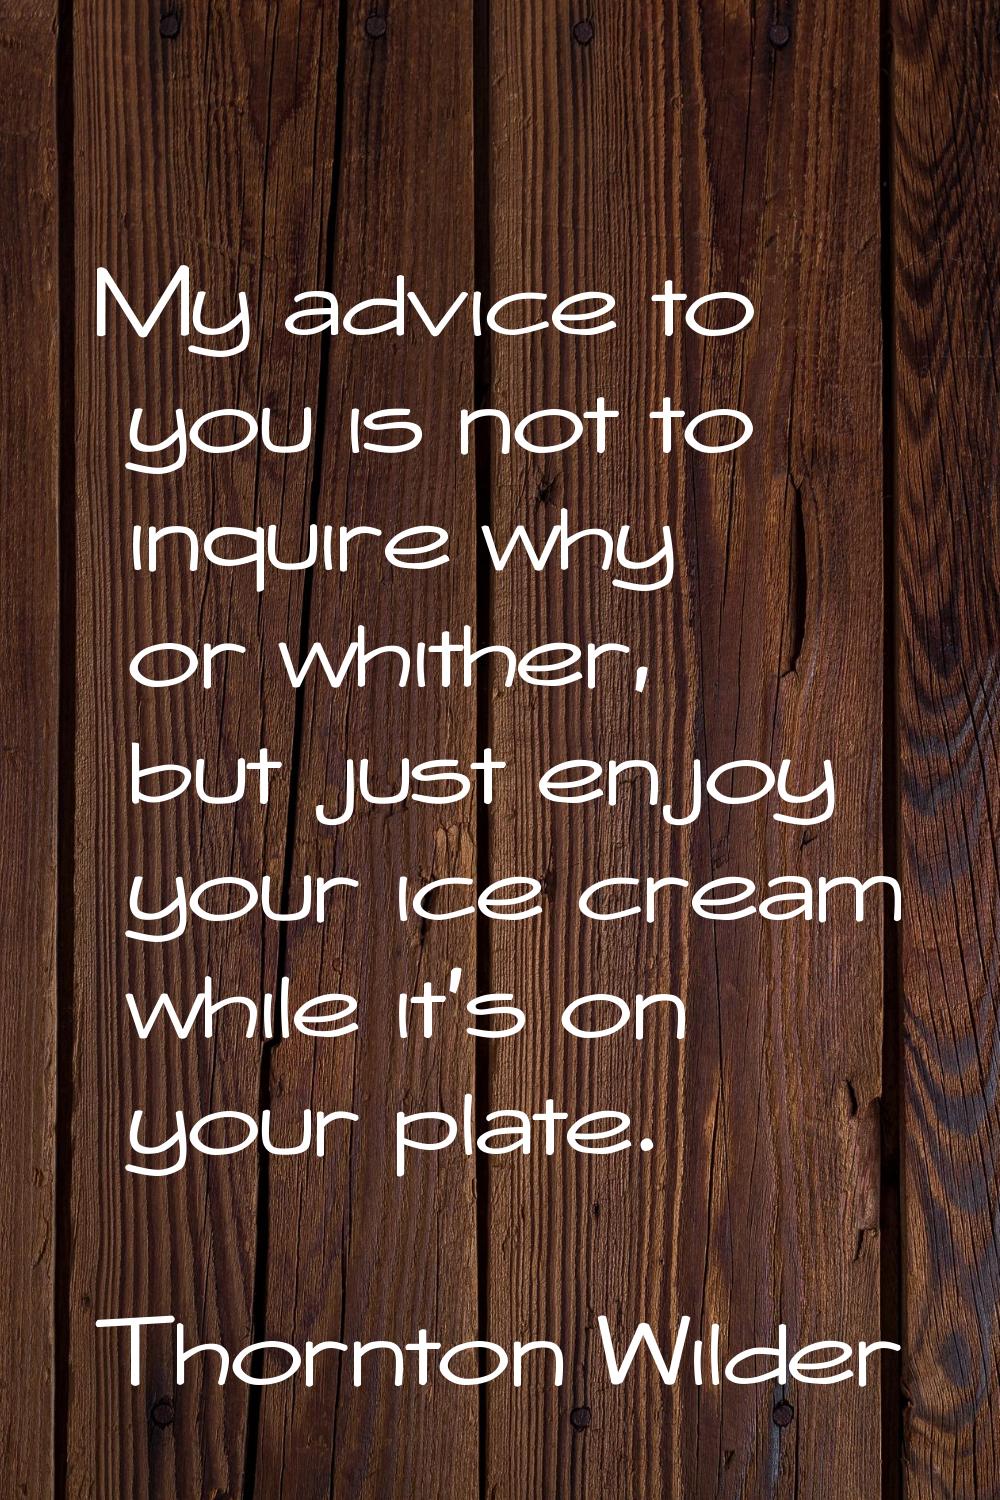 My advice to you is not to inquire why or whither, but just enjoy your ice cream while it's on your